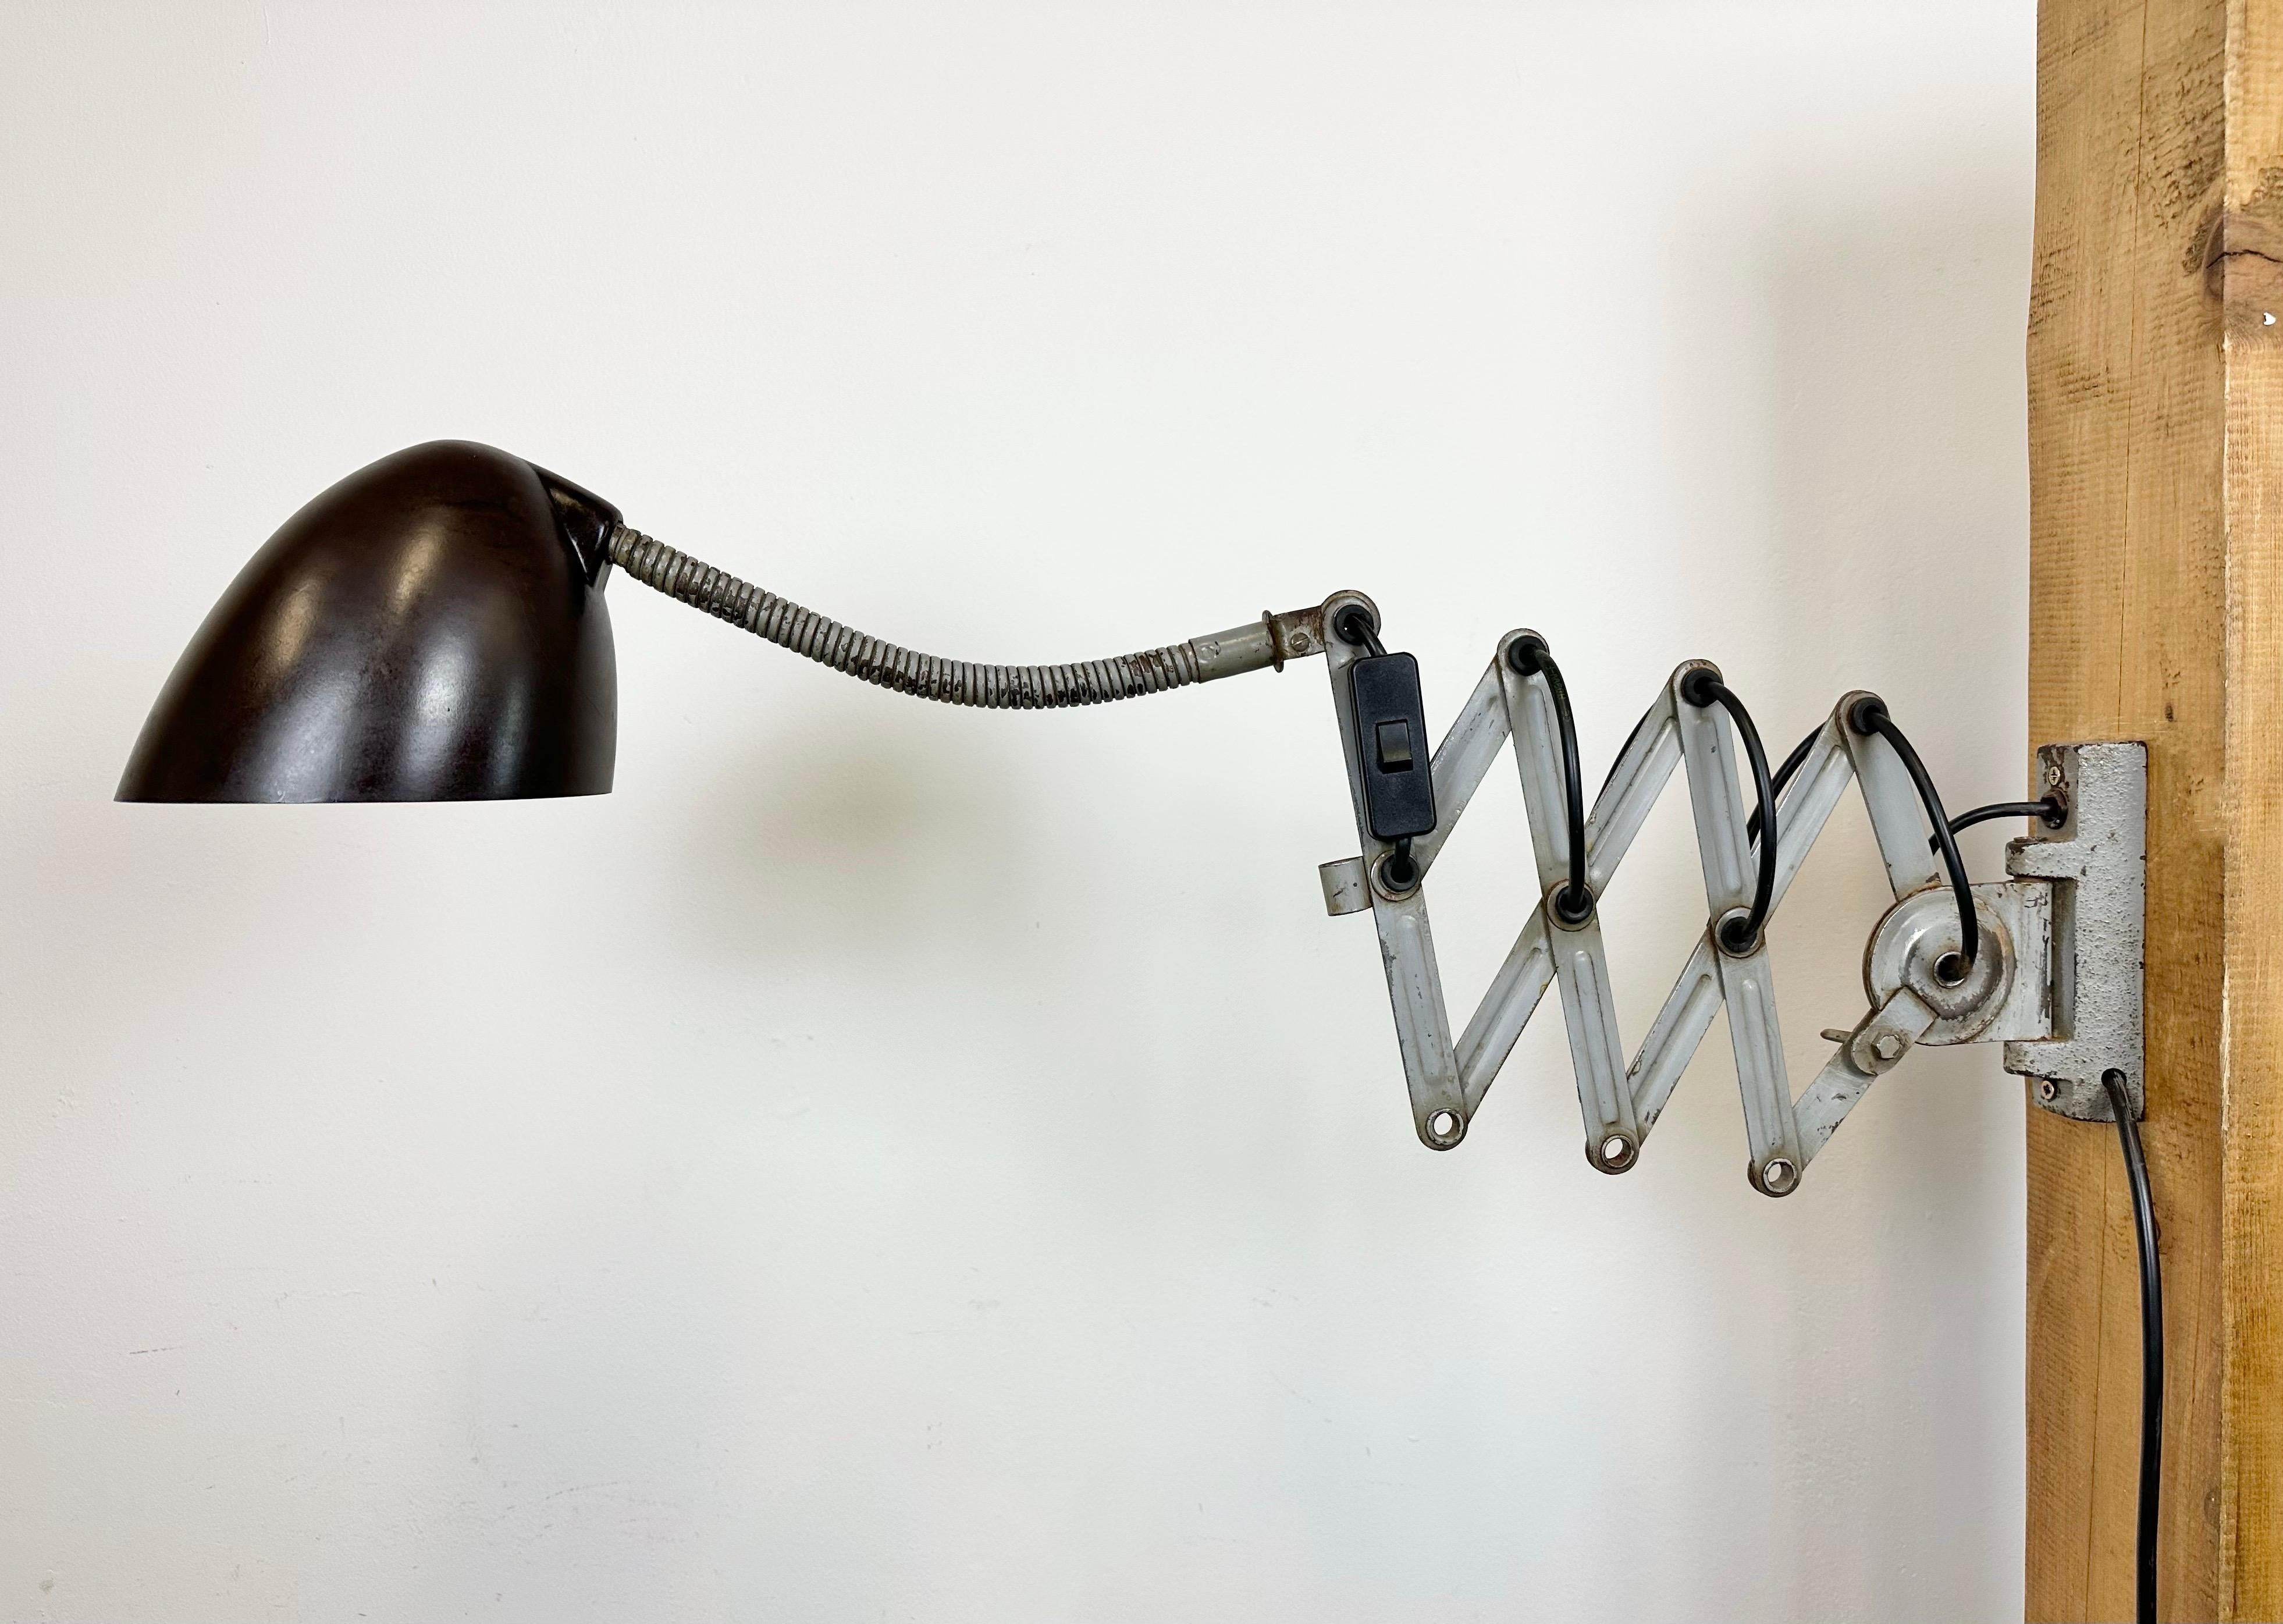 This vintage Industrial scissor wall light was produced by Elektroinstala in former Czechoslovakia during the 1960s. Lamp has a brown bakelite shade. Grey iron scissor arm is extendable and can be turned sideways. Fully functional. The original